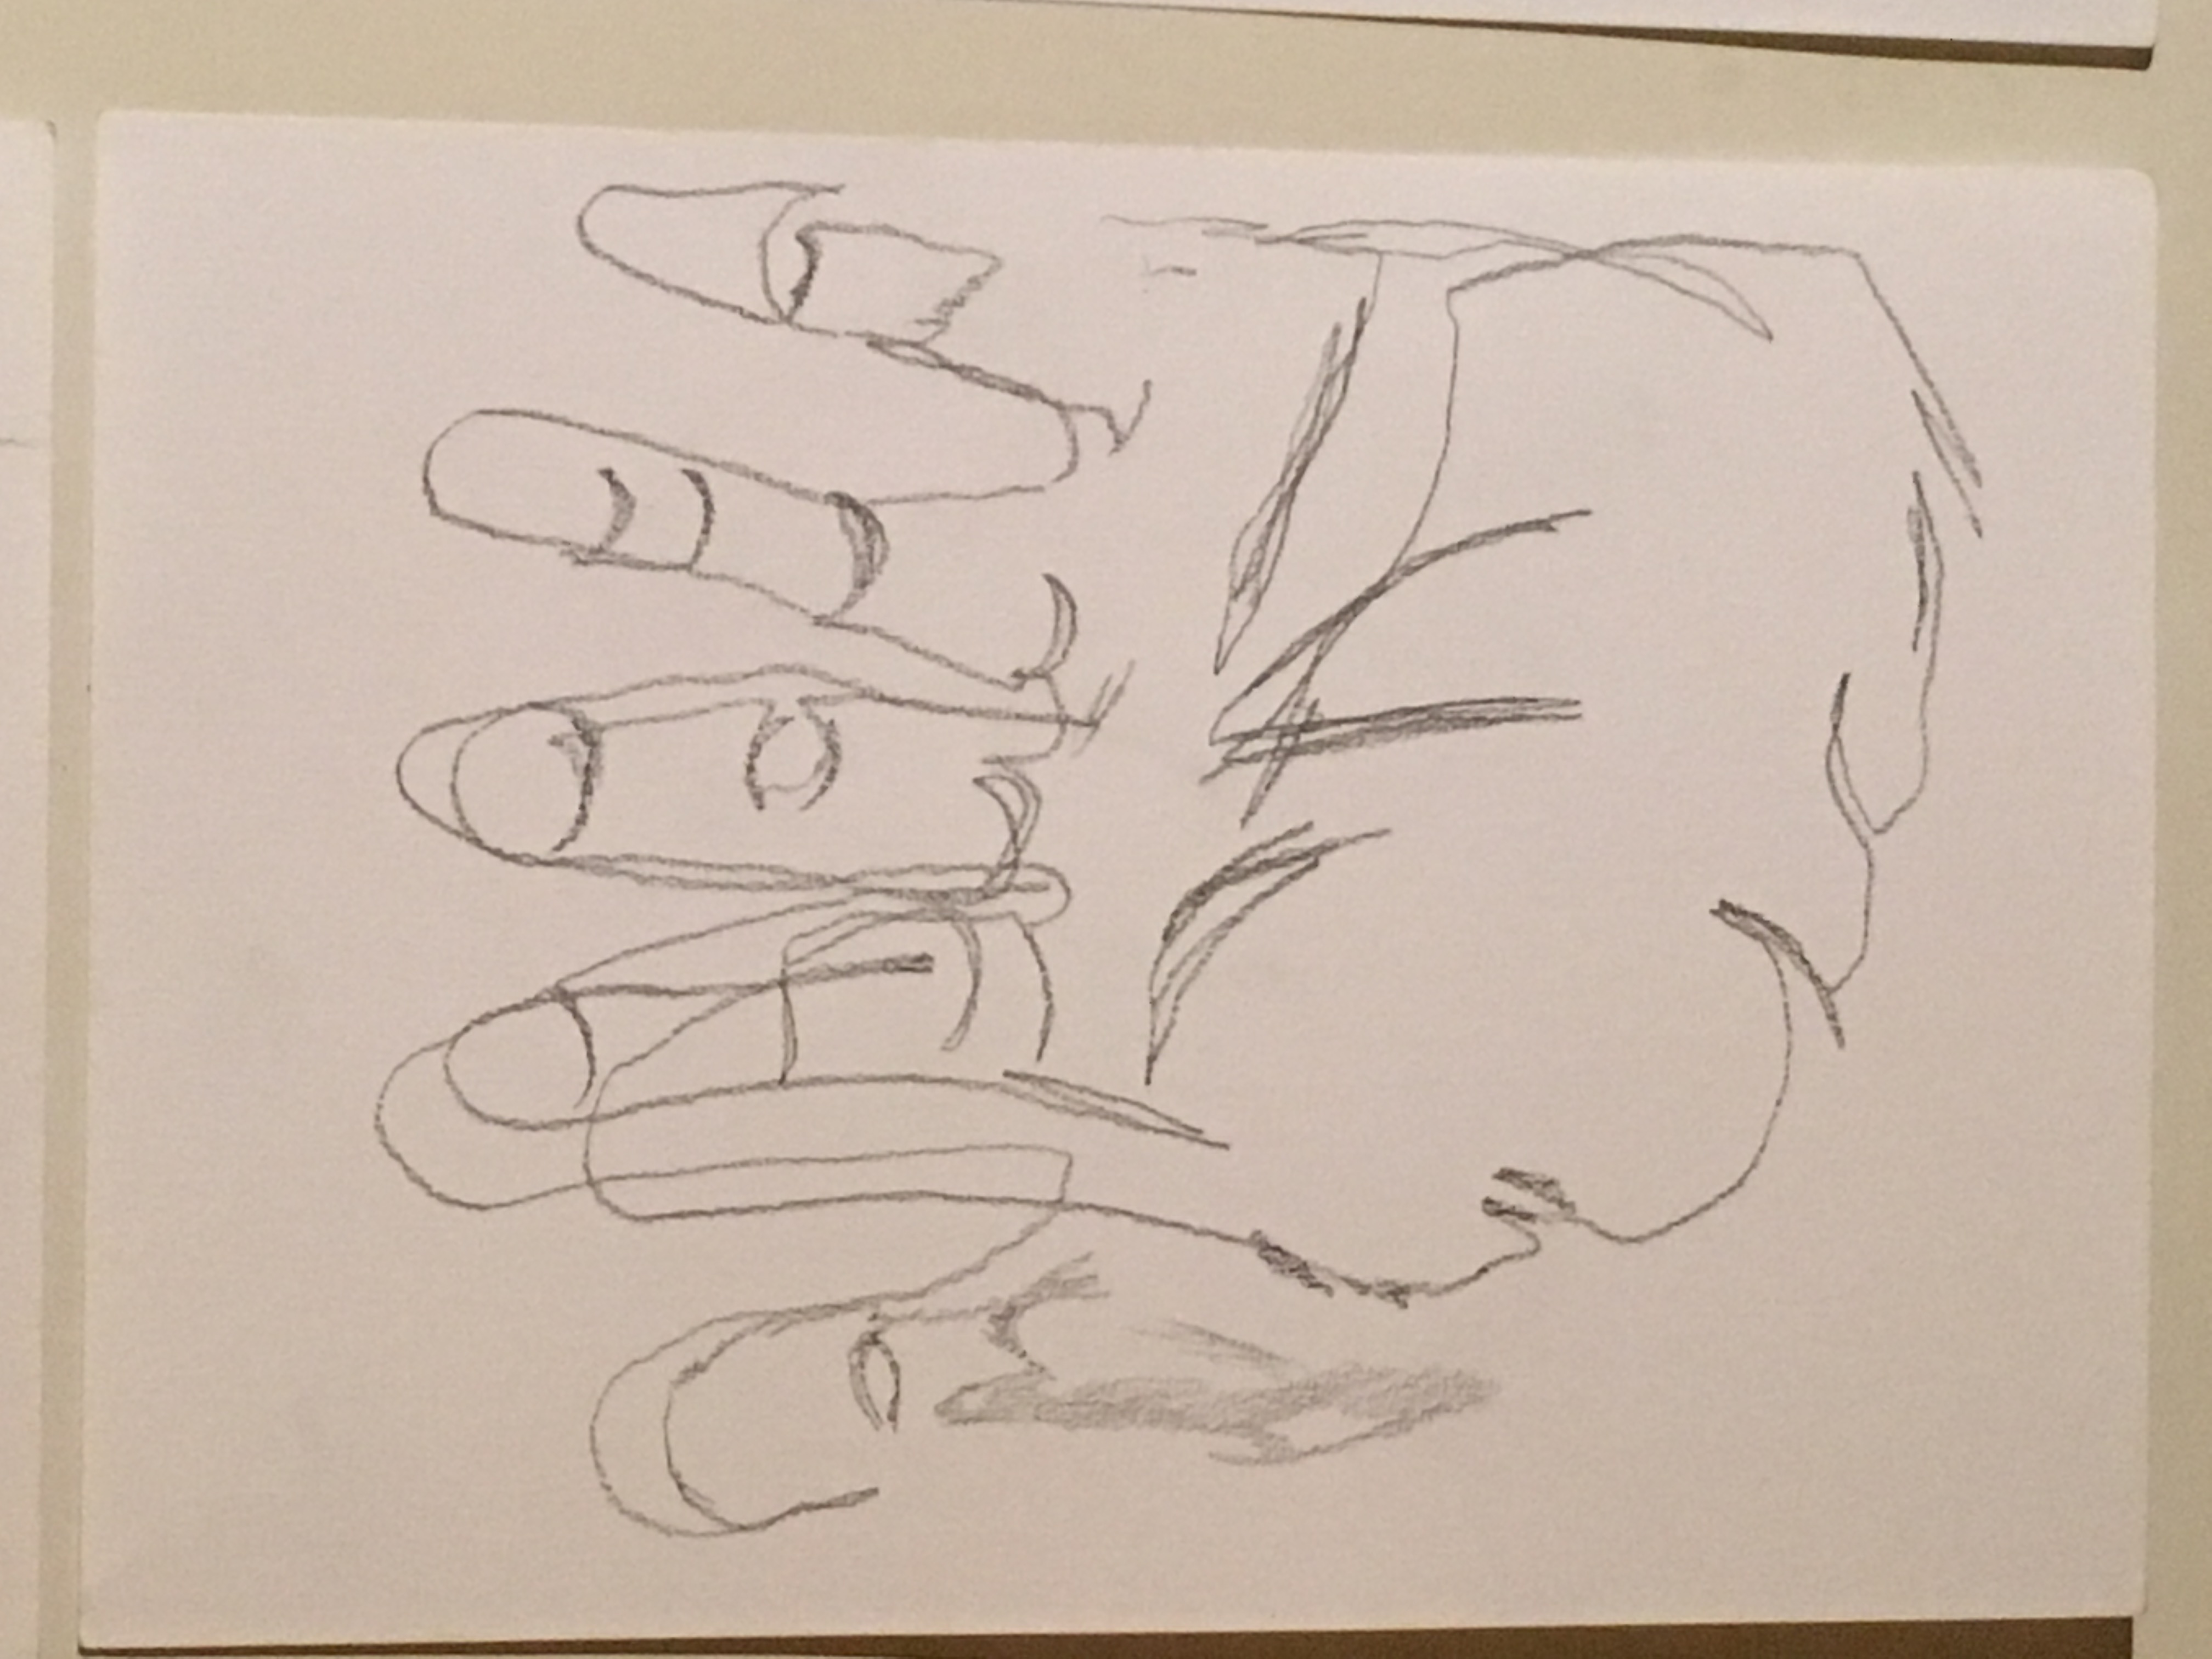 WK 1 Exercise Hand Drawings